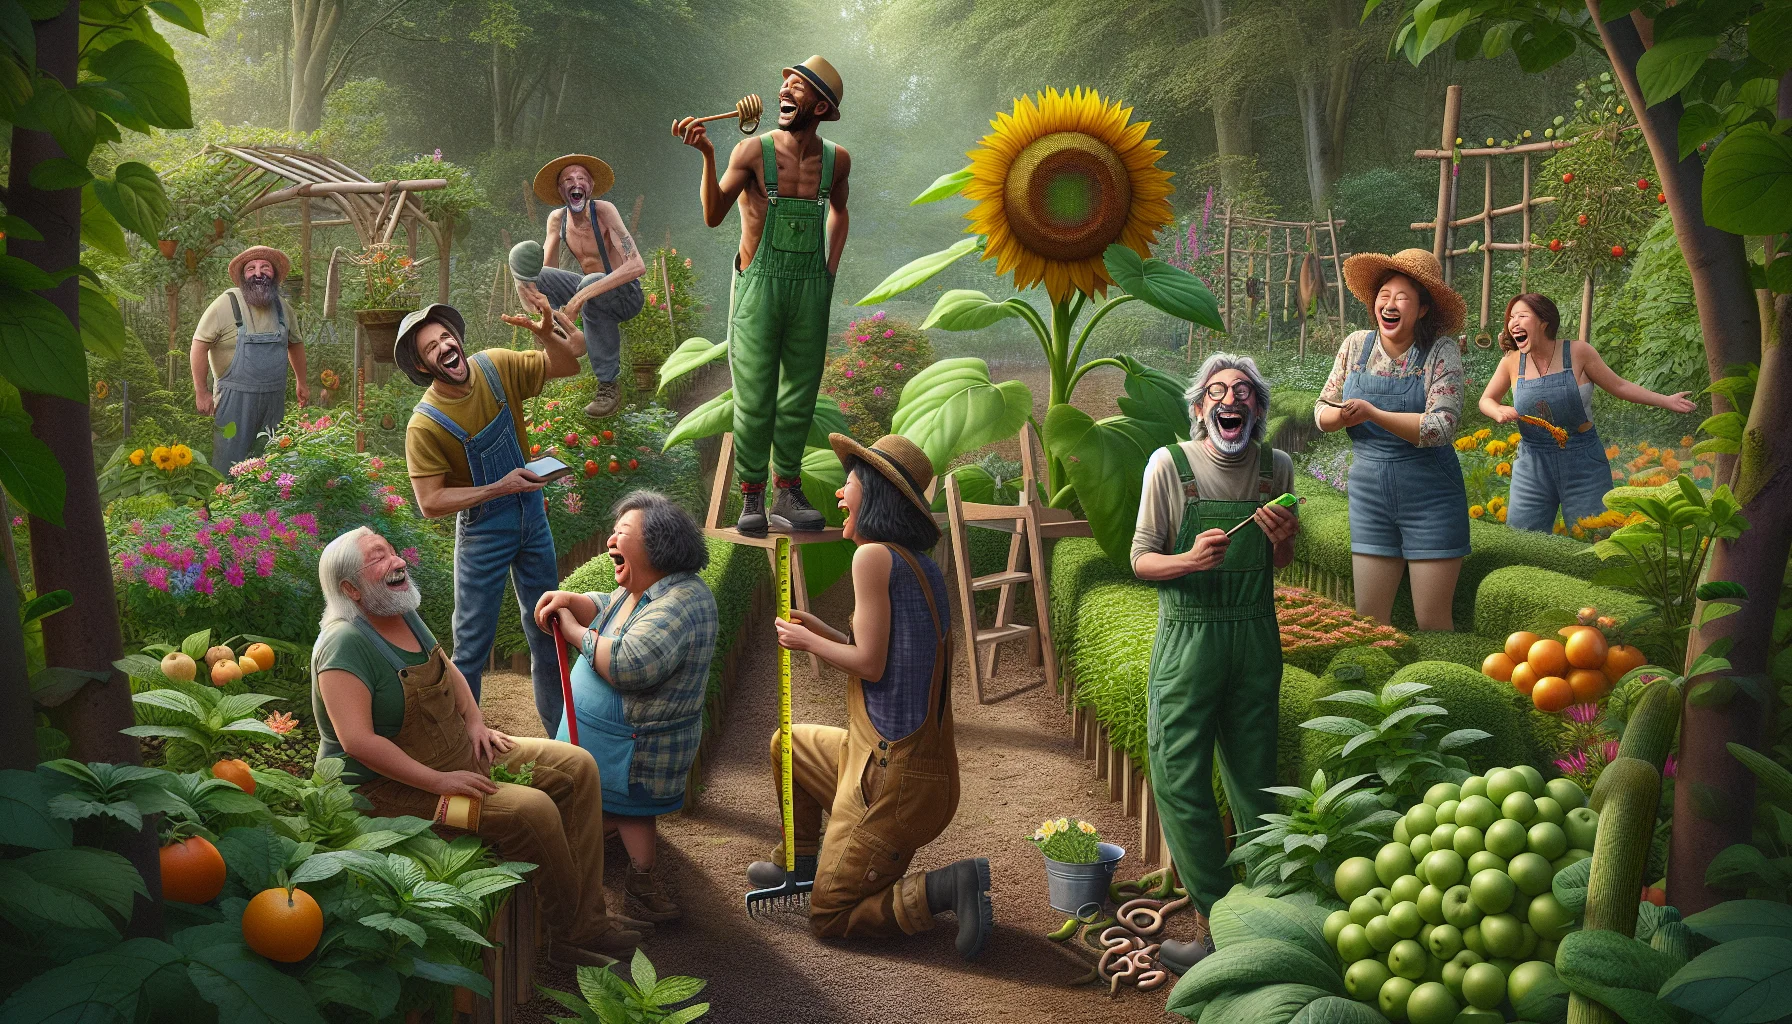 Imagine a hilarious gardening scenario where a group of diverse individuals, each of different genders and descents like Caucasian, Hispanic, South Asian, Black, Middle-Eastern and East Asian, labor cheerily in a richly designed forest garden. Among them, a man with leafy overalls is trying to communicate with a stubborn plant, a woman using a large sunflower as an umbrella and another person attempting to measure a giggling worm with a ruler. The atmosphere is lively and filled with laughter. The diverse ecosystem, tall fruit trees, lush green undergrowth, and winding pathways make the garden a paradise brimming with biodiversity and gardening humor.